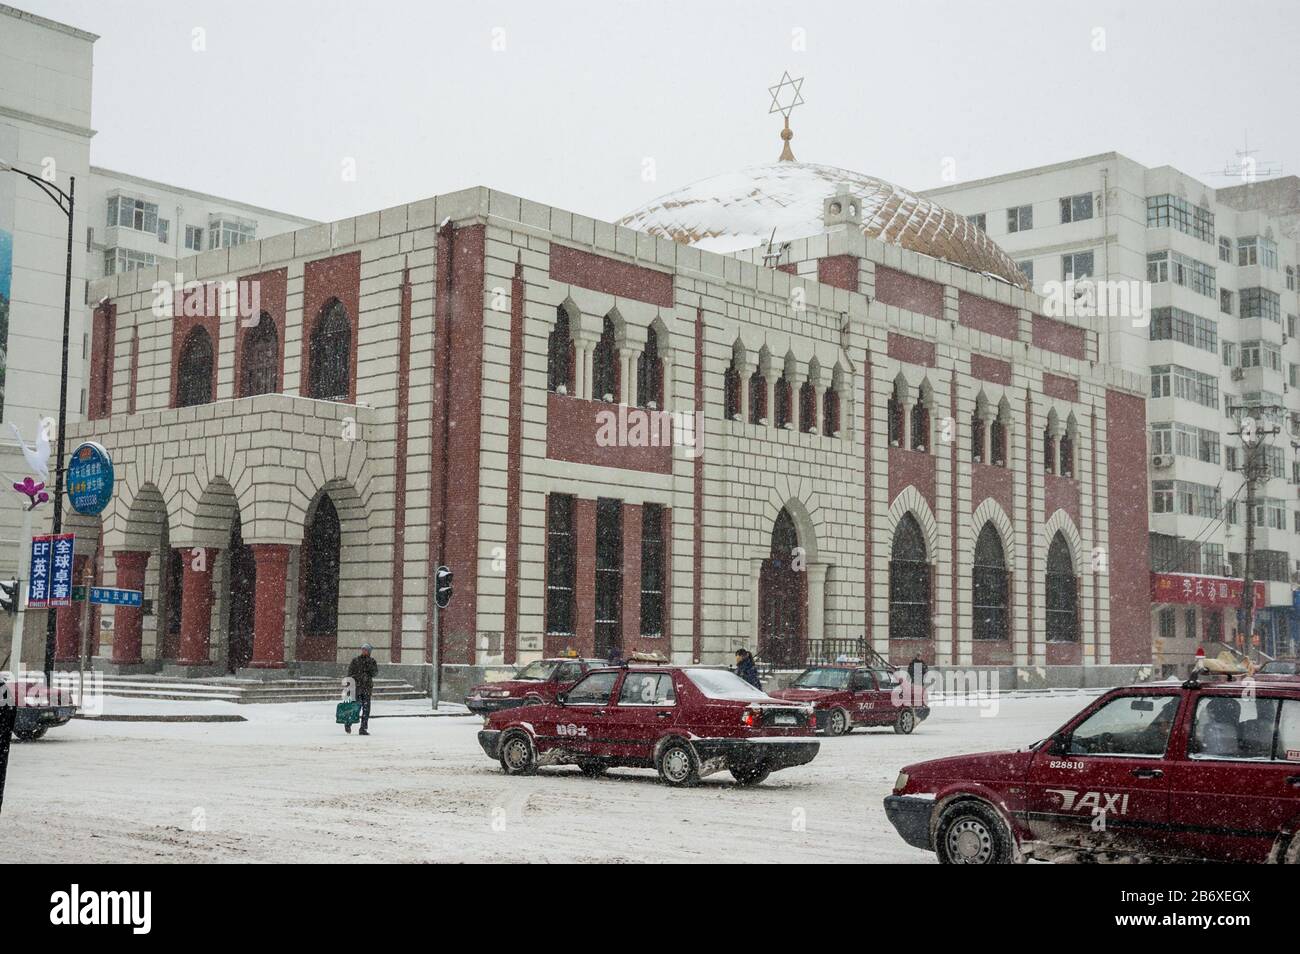 Harbin New Synagogue on a snowy winter’s day. Stock Photo